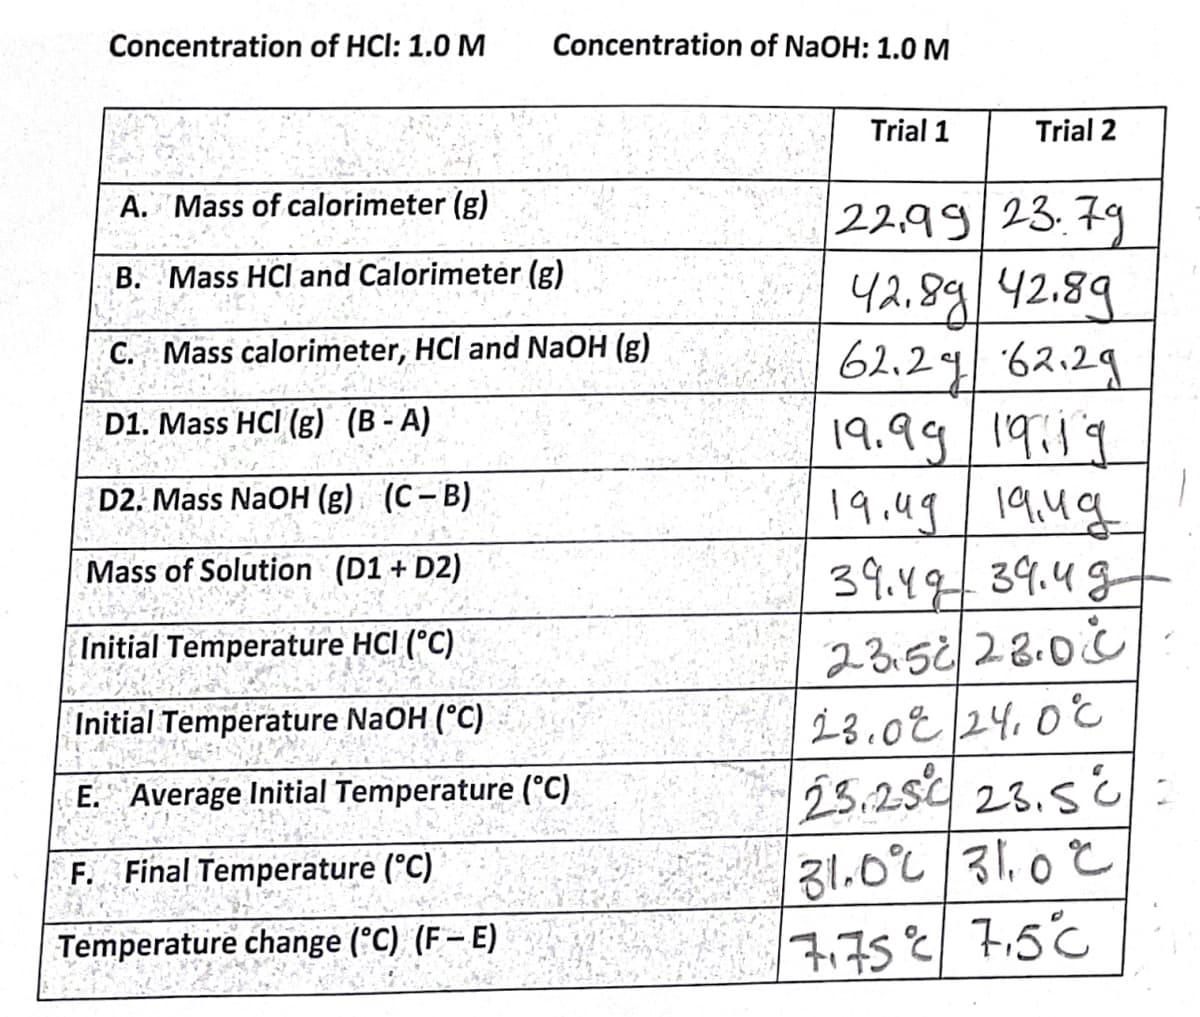 Concentration of HCl: 1.0 M
Concentration of NaOH: 1.0 M
Trial 1
Trial 2
A. Mass of calorimeter (g)
|22,9923.79
42.89 42.89
62.29 62.29
|१.१५ | ।१.।१
|१.५१ | व५वू-
39.4939.4g
23.5/28.00
23.0E|24, 0C
23.25 23.5 c:
31.0%/31.0€
7,75€7,5°c
B. Mass HCl and Calorimeter (g)
C. Mass calorimeter, HCl and NaOH (g)
D1. Mass HCI (g) (B - A)
D2. Mass NaOH (g) (C-B)
Mass of Solution (D1 + D2)
Initial Temperature HCI (°C)
Initial Temperature NaOH (°C)
E. Average Initial Temperature (°C)
F. Final Temperature (°C)
Temperature change (°C) (F– E)
